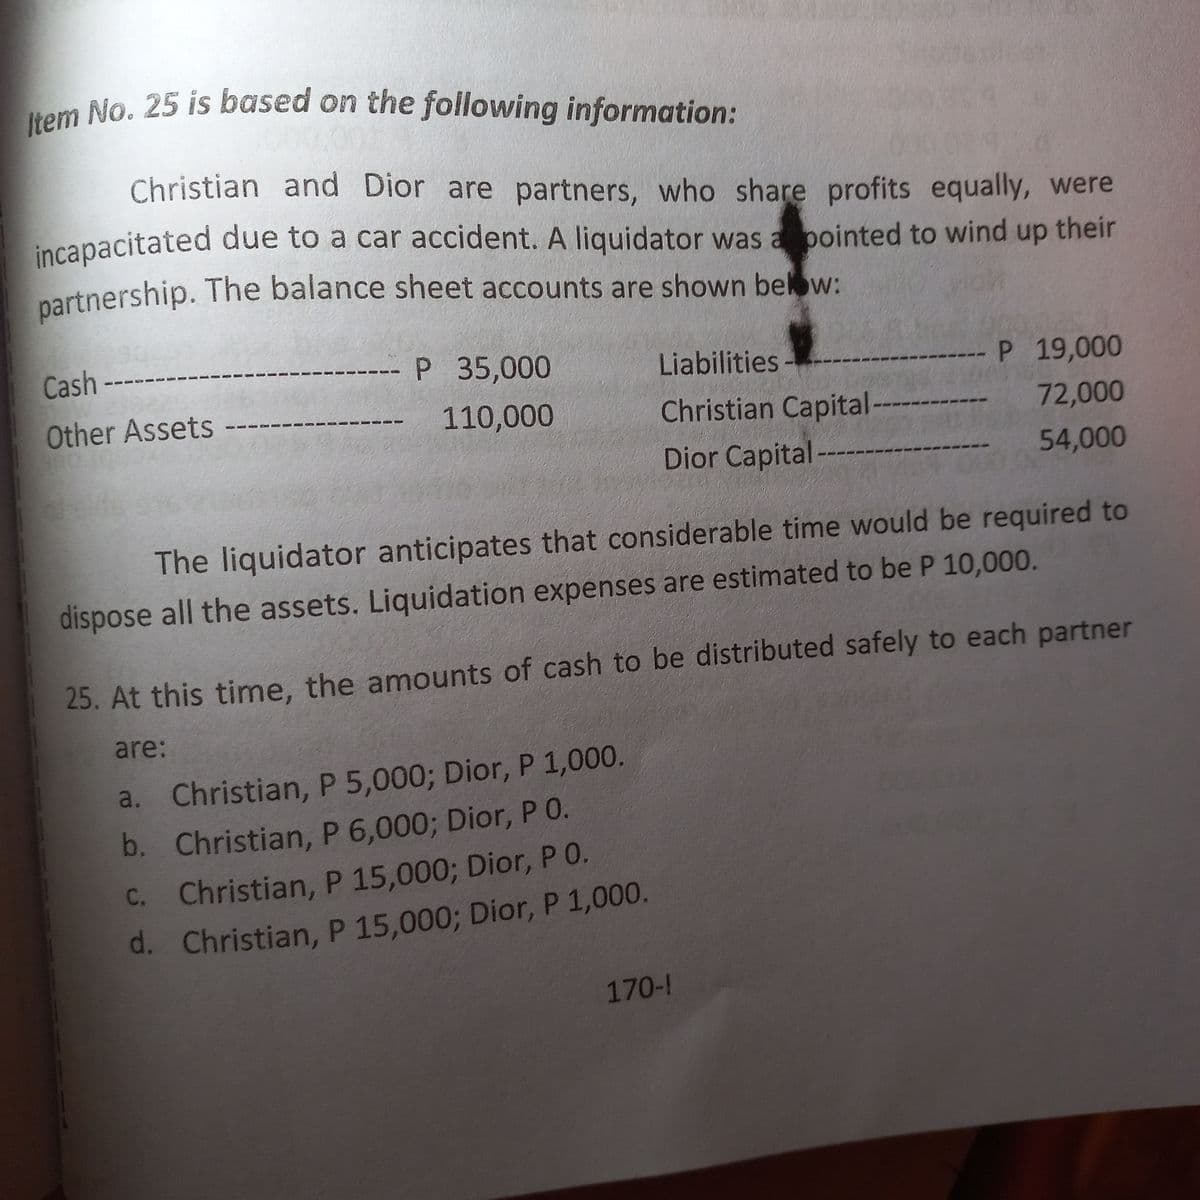 Item No. 25 is based on the following information:
Christian and Dior are partners, who share profits equally, were
incapacitated due to a car accident. A liquidator was appointed to wind up their
partnership. The balance sheet accounts are shown below:
P 35,000
Cash
Other Assets
Liabilities
110,000
Christian Capital --
Dior Capital
P 19,000
72,000
54,000
The liquidator anticipates that considerable time would be required to
dispose all the assets. Liquidation expenses are estimated to be P 10,000.
25. At this time, the amounts of cash to be distributed safely to each partner
are:
a.
Christian, P 5,000; Dior, P 1,000.
b. Christian, P 6,000; Dior, P 0.
Christian, P 15,000; Dior, P O.
C.
d. Christian, P 15,000; Dior, P 1,000.
170-!